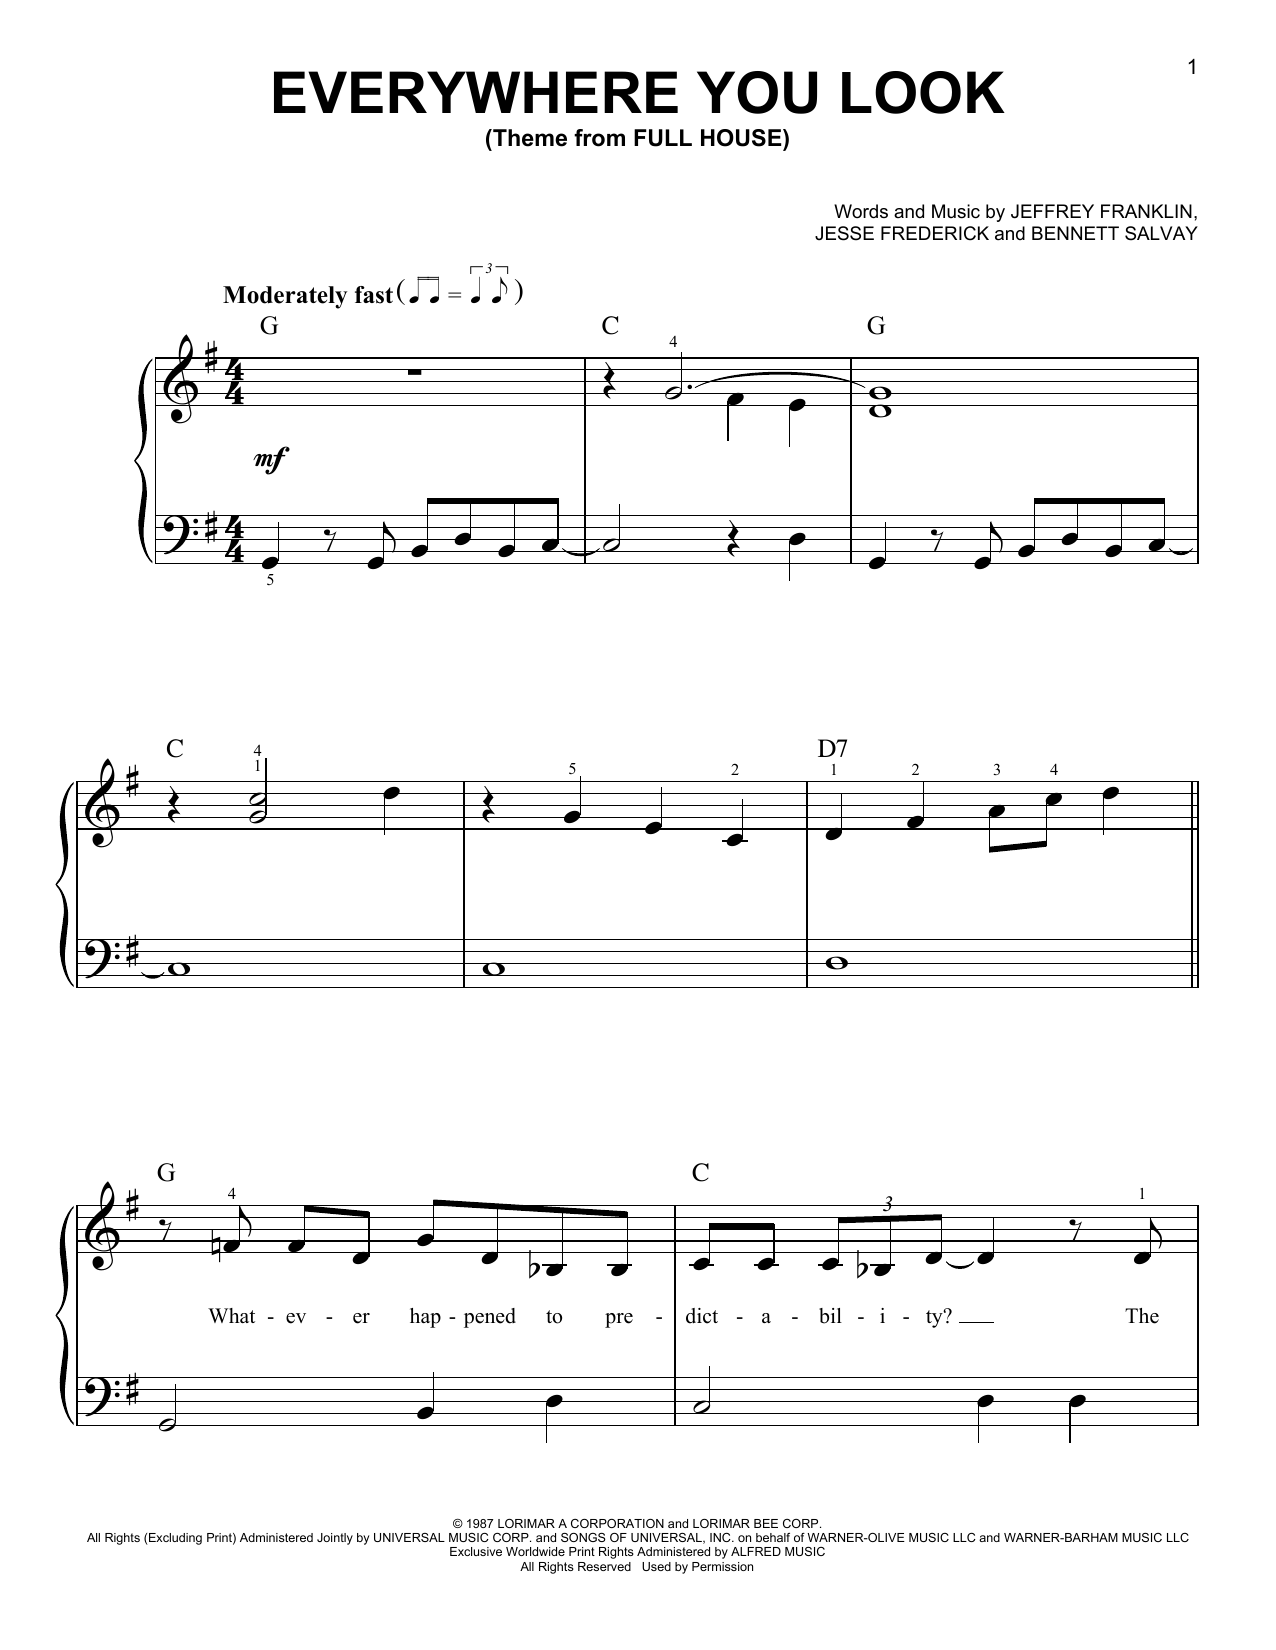 Download Jesse Frederick Everywhere You Look (Theme from Full Ho Sheet Music